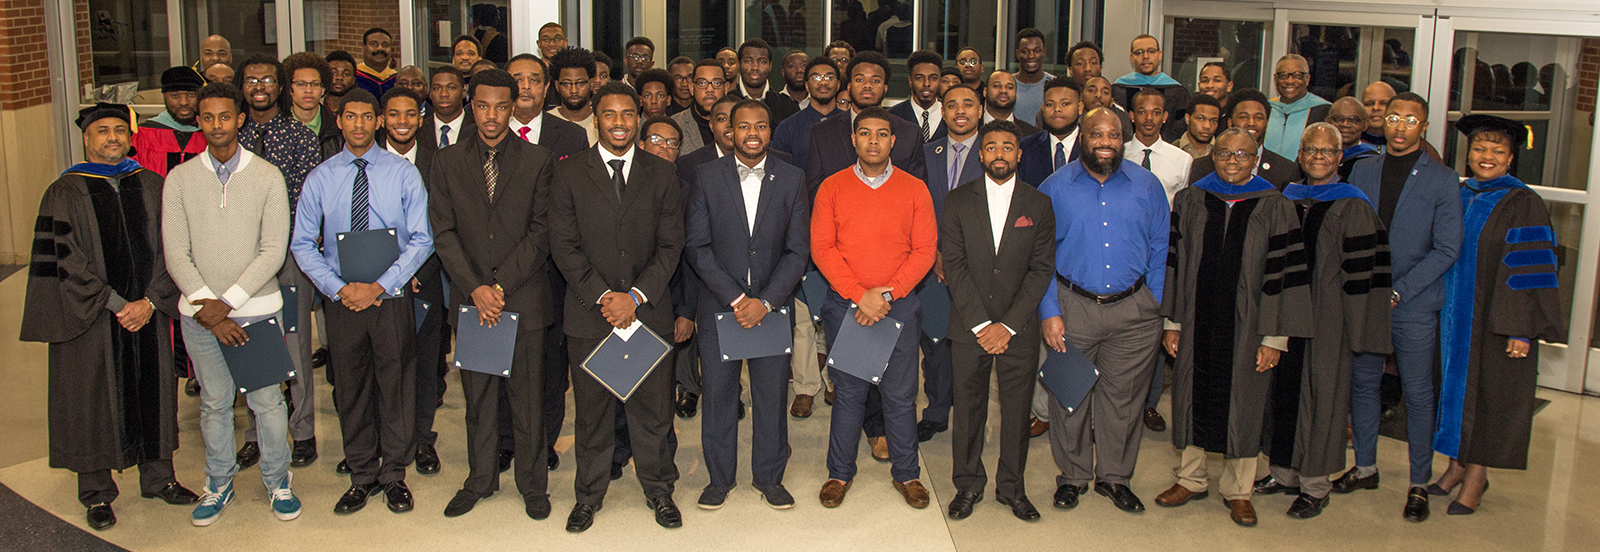 Participants of the African American Male Academy